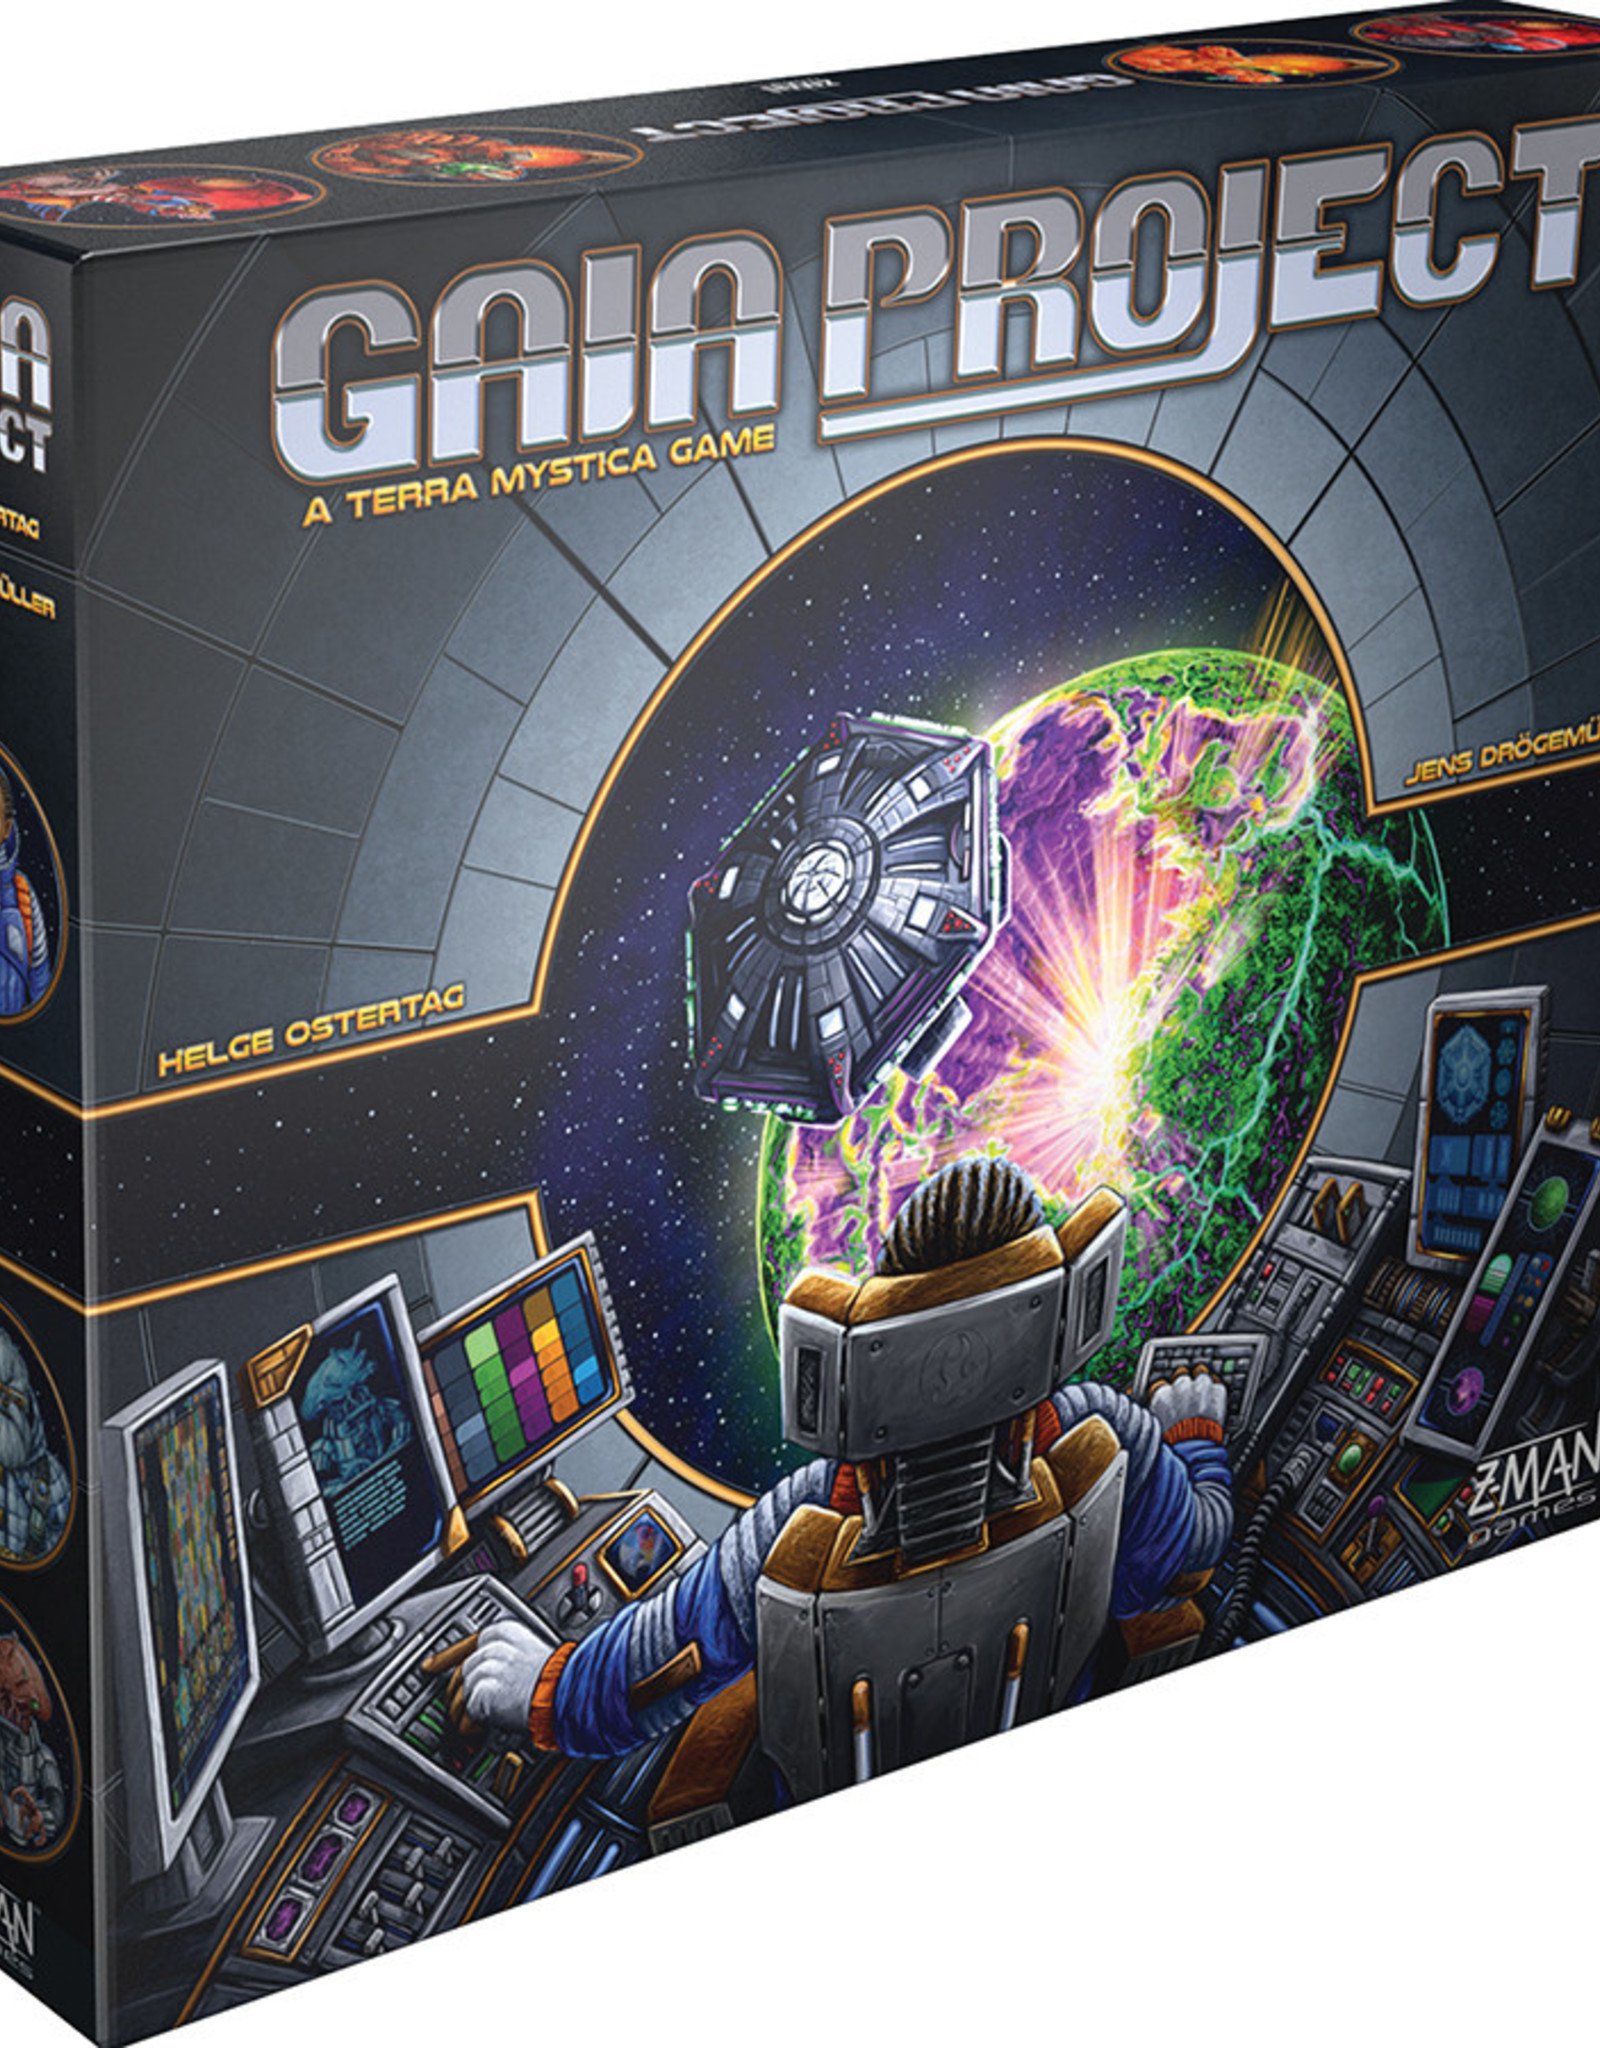 gaia project watch it played